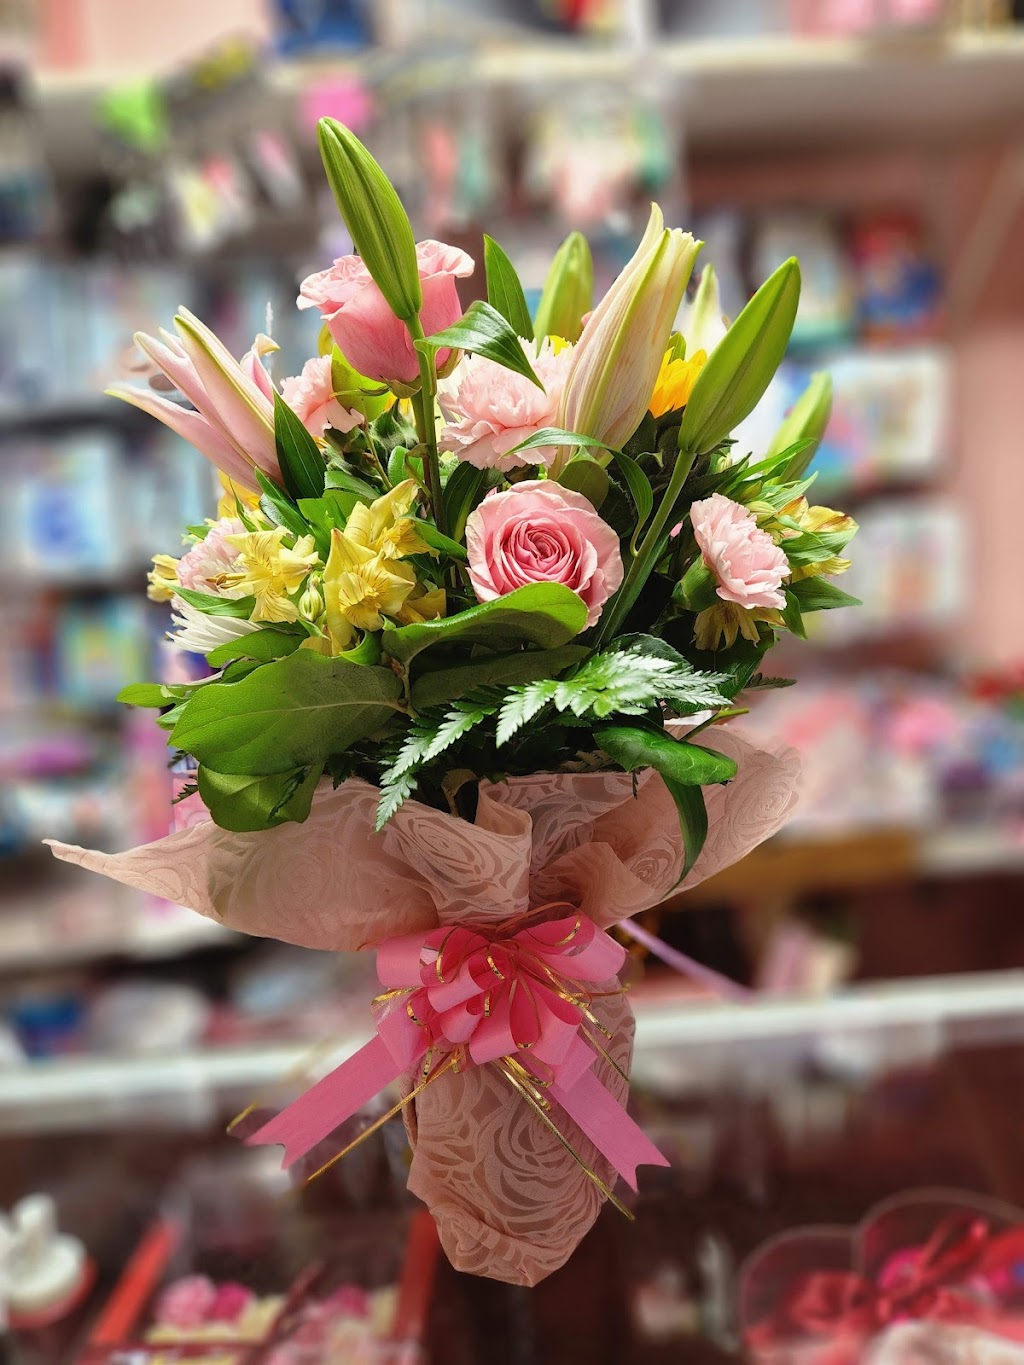 Gigis Flowers & Balloons | 1102 W Florence Ave, Los Angeles, CA 90044, USA | Phone: (213) 210-5322